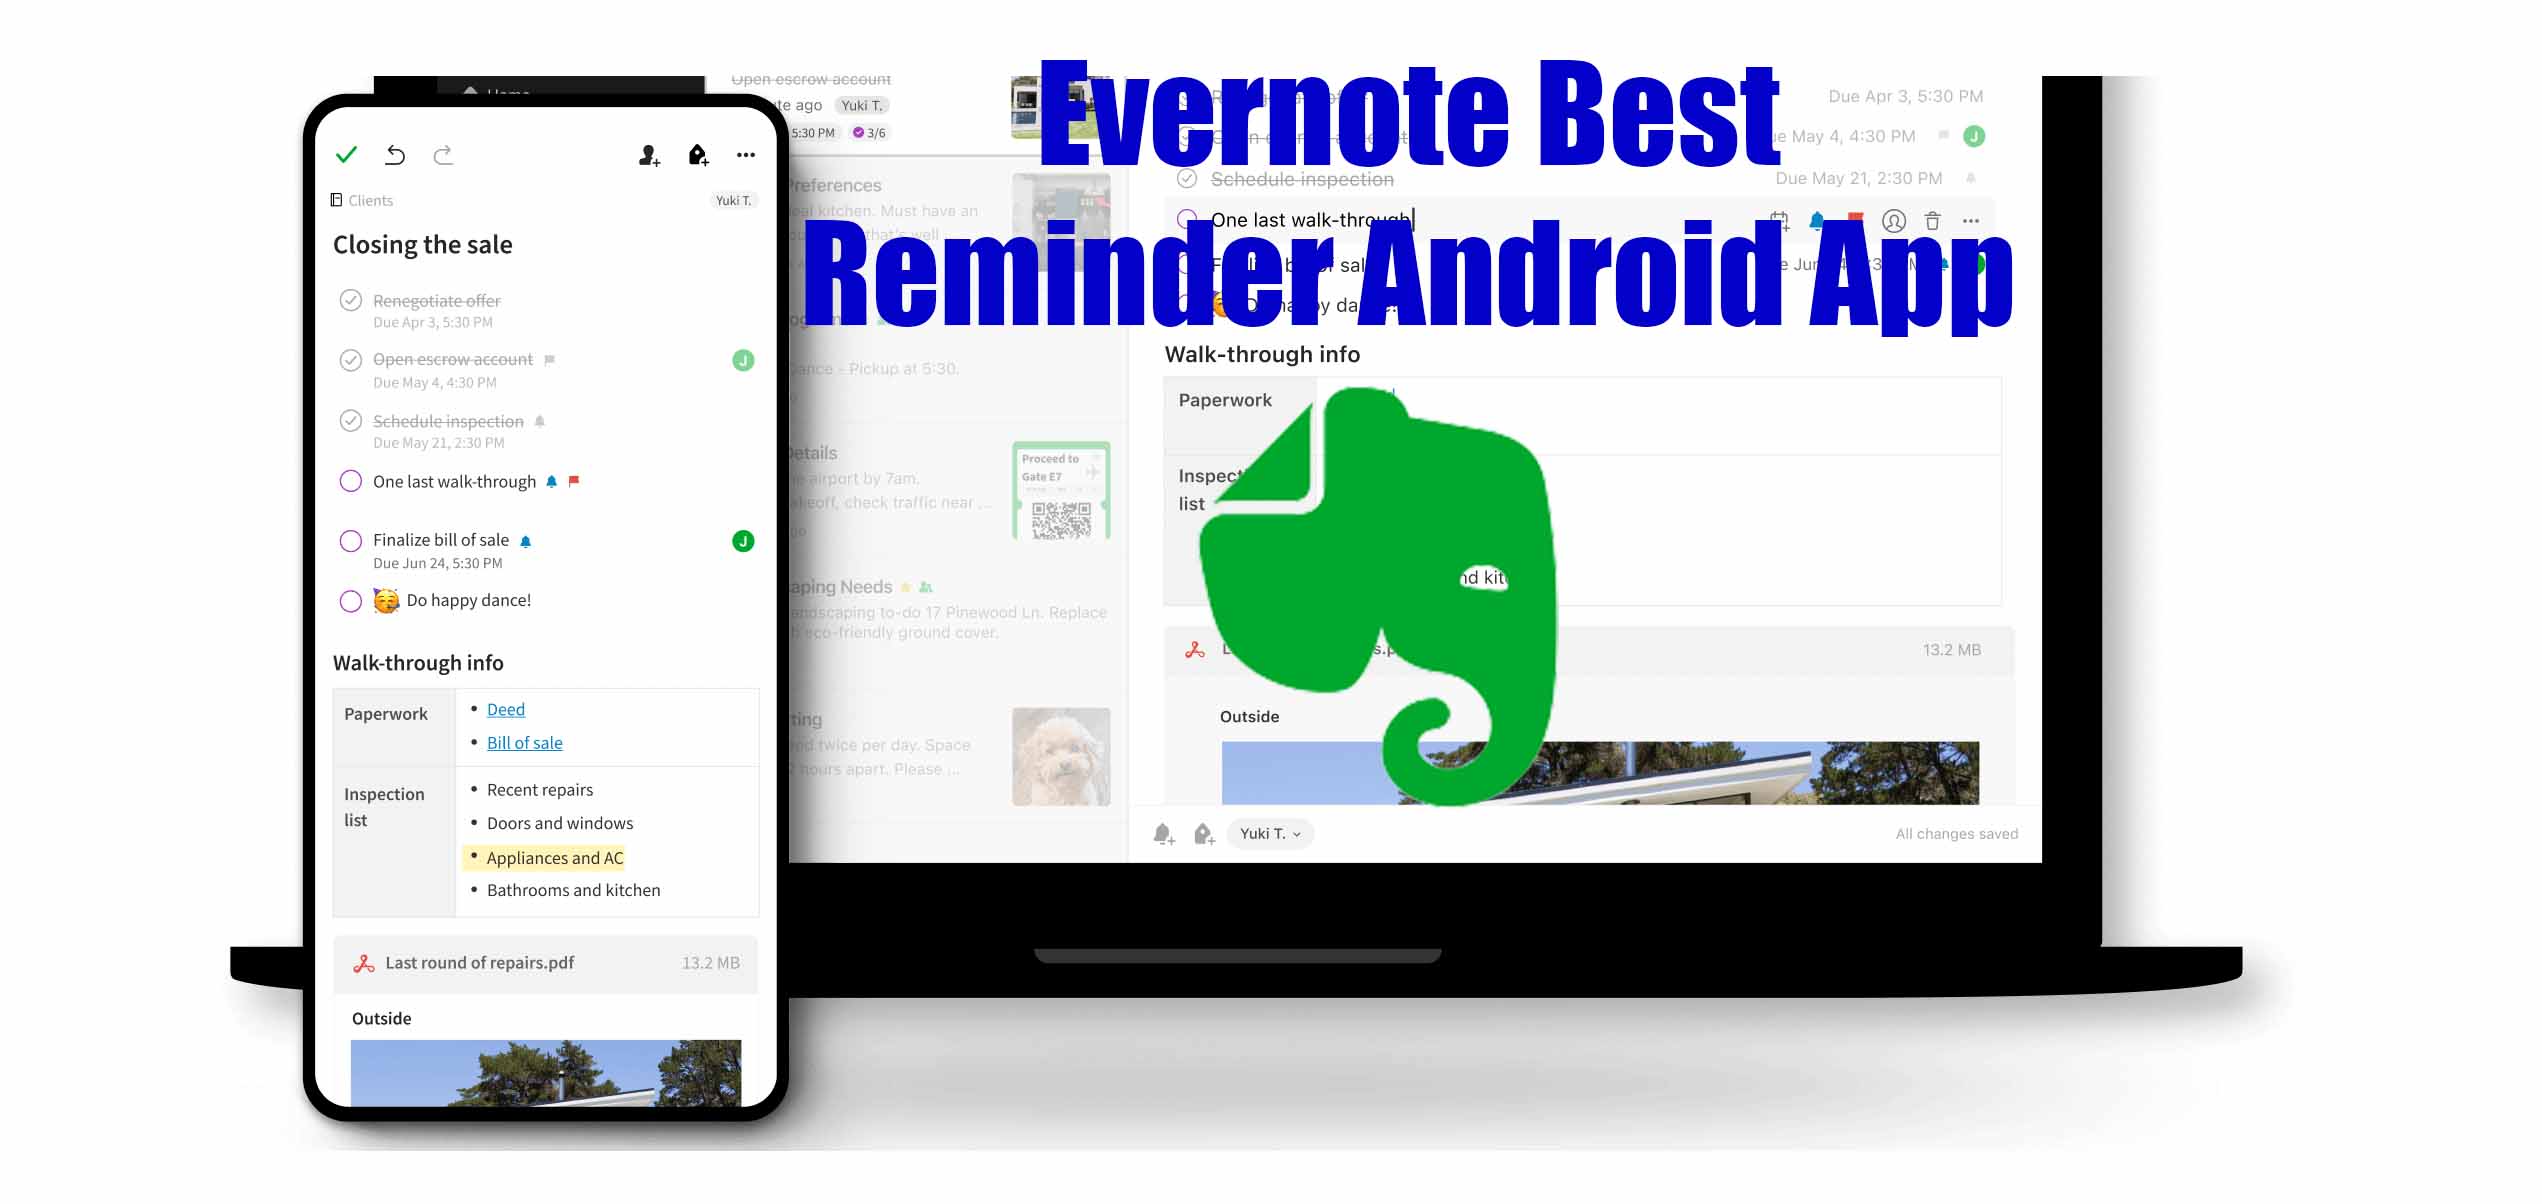 Evernote best Reminder App for Android